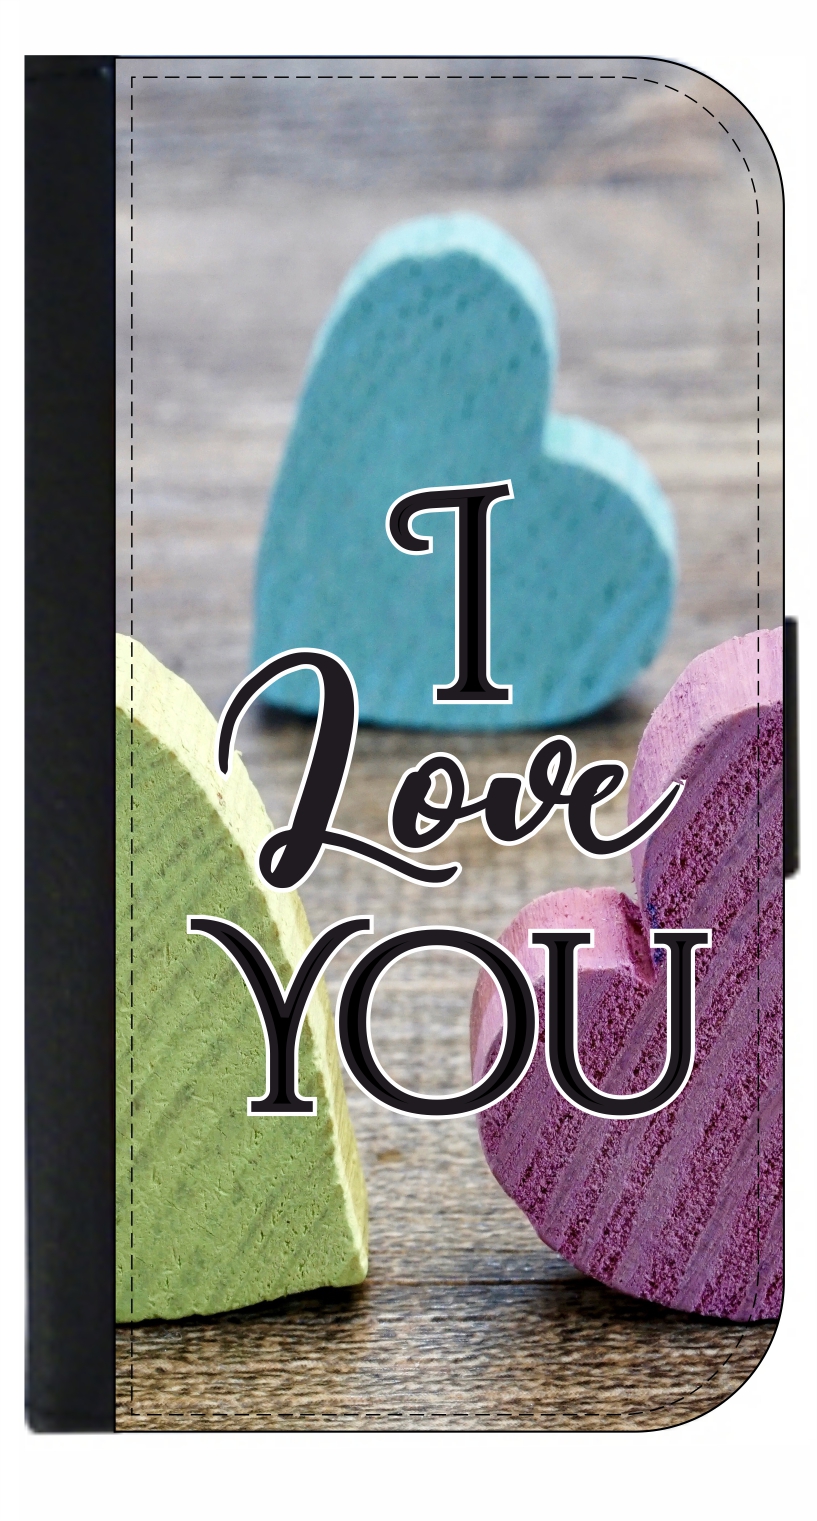 I Love You - Wood Print Hearts - Galaxy s10p Case - Galaxy s10 Plus Case - Galaxy s10 Plus Wallet Case - s10 Plus Case Wallet - Galaxy s10 Plus Case Wallet - s10 Plus Case Flip Cover - image 1 of 3